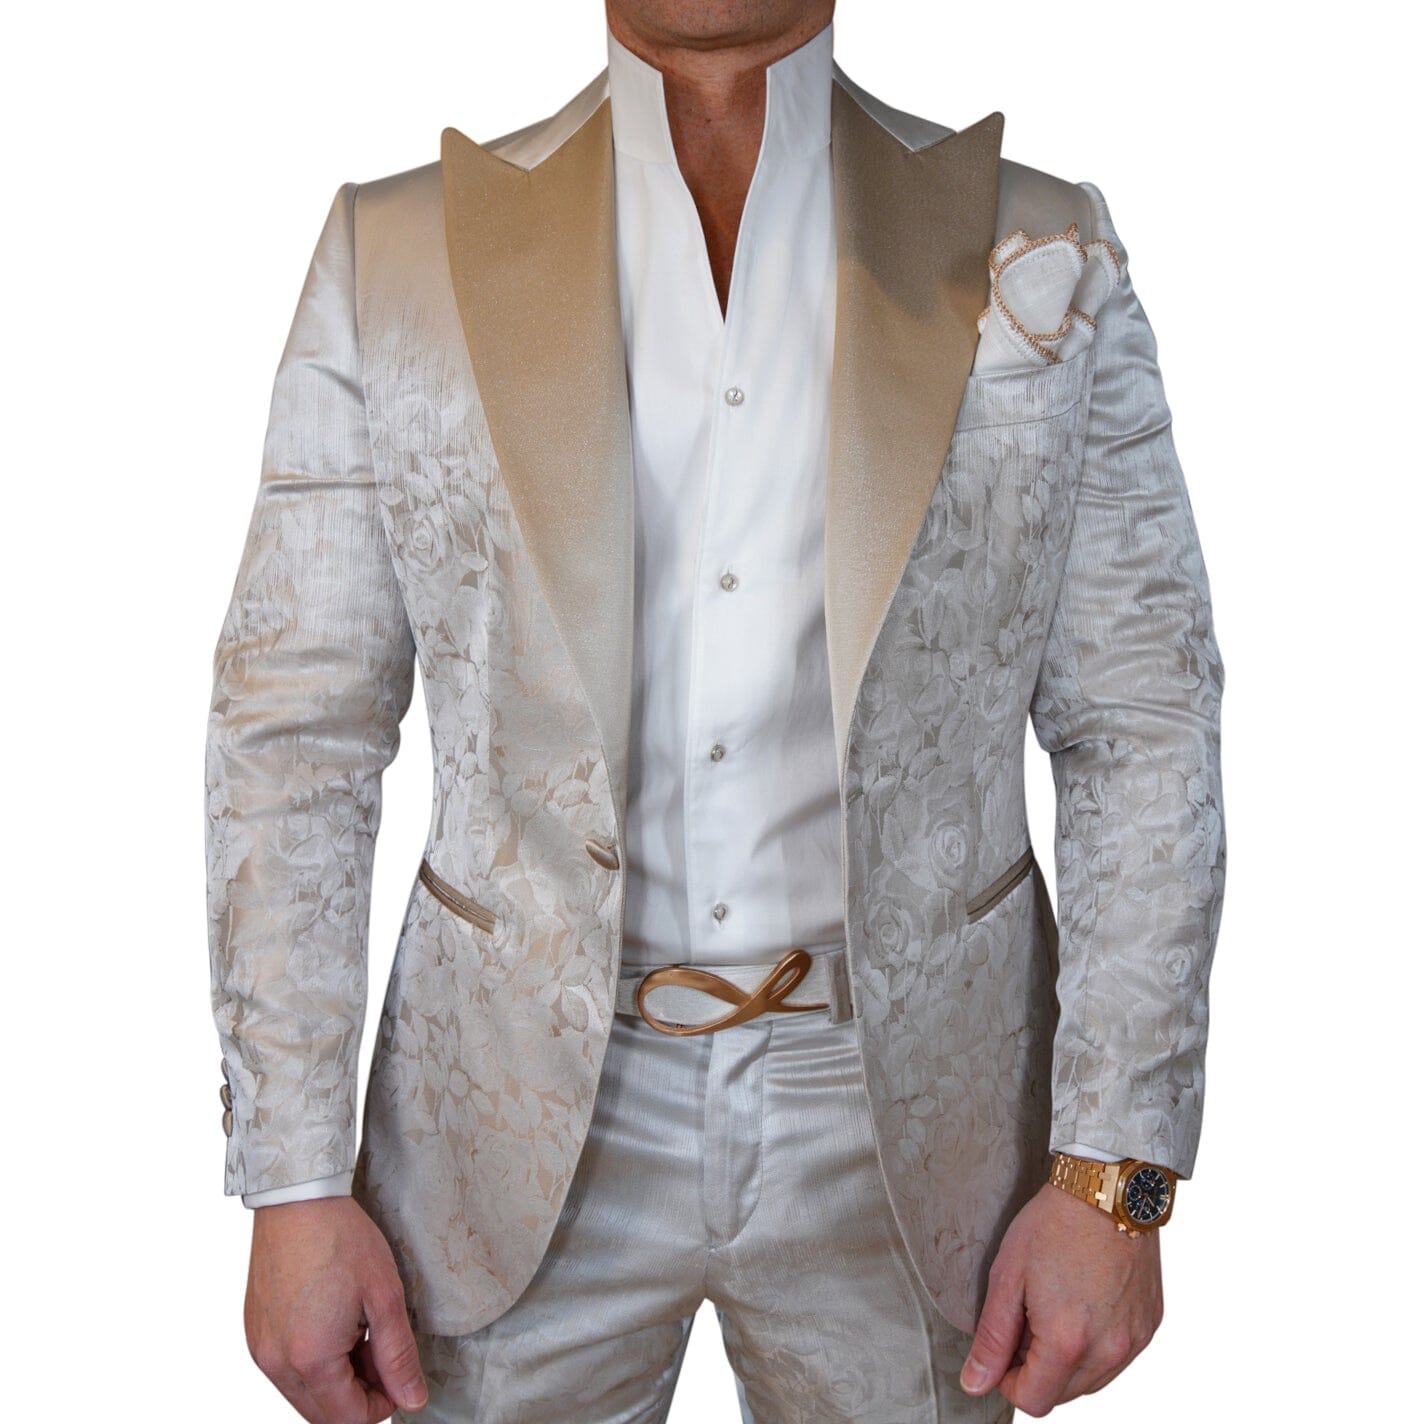 Champagne Sateen Ombre Jacket